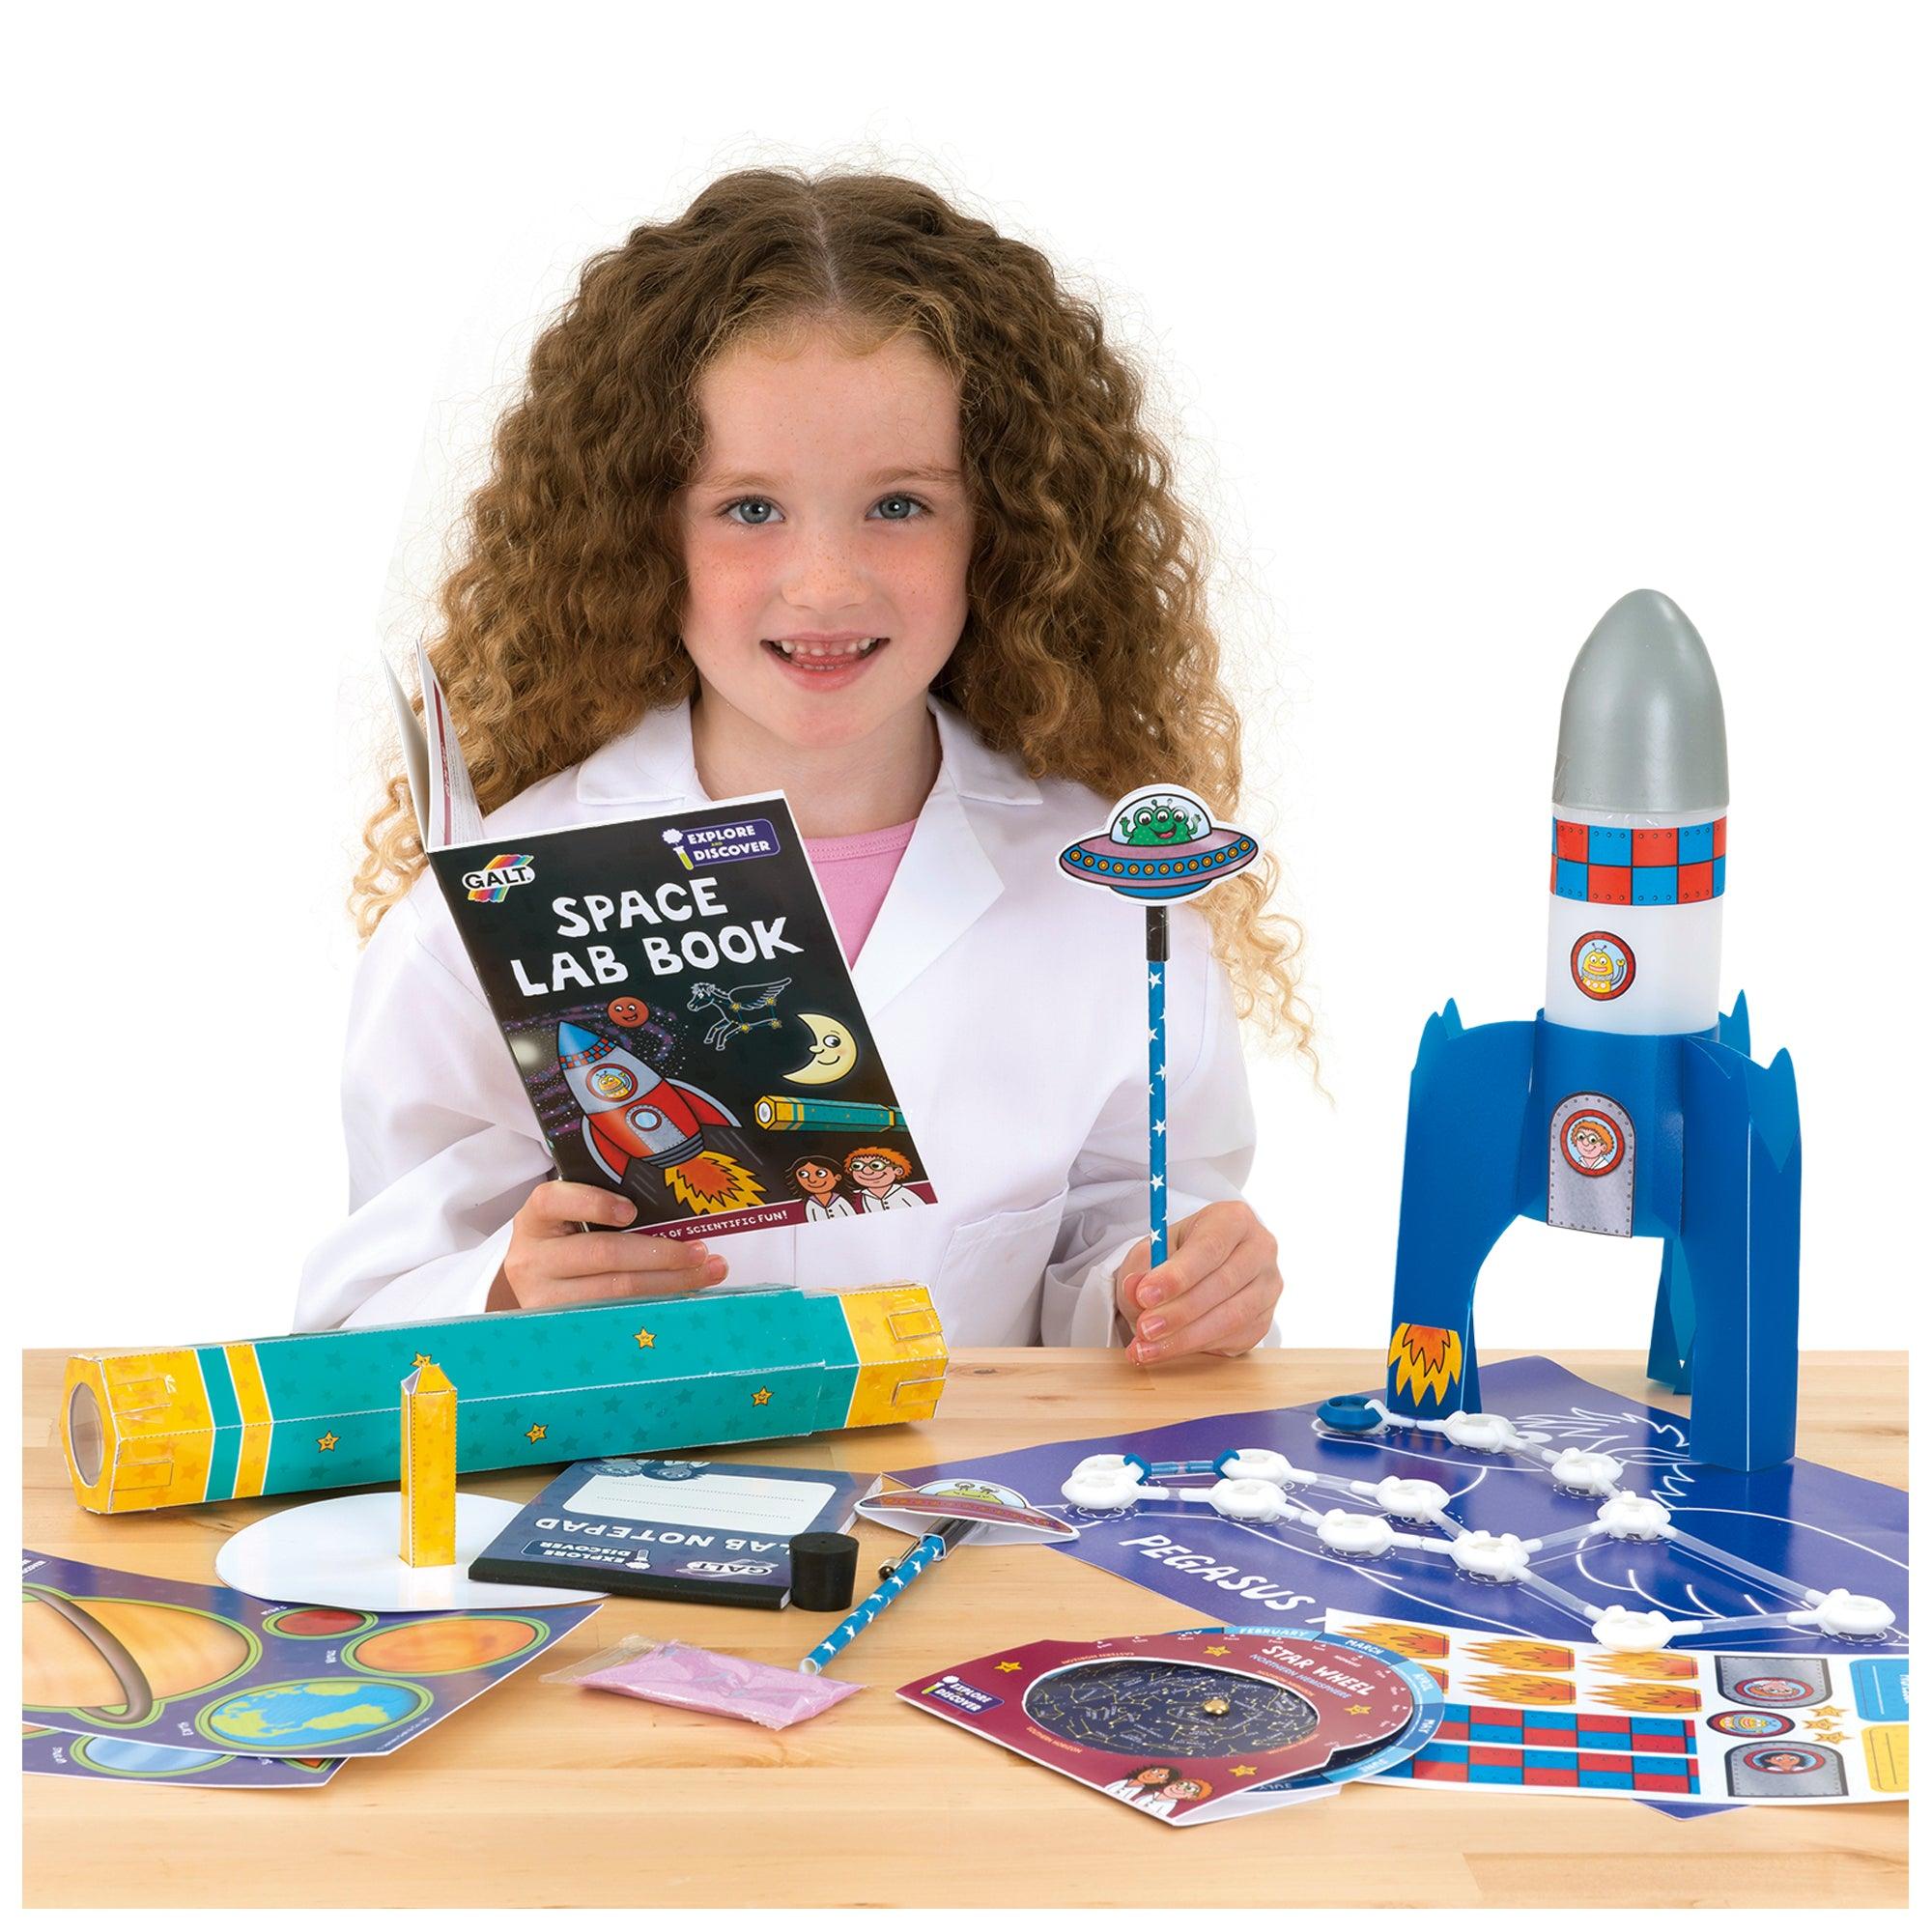 science projects for children - galt toys science kit - shop galt toys space lab